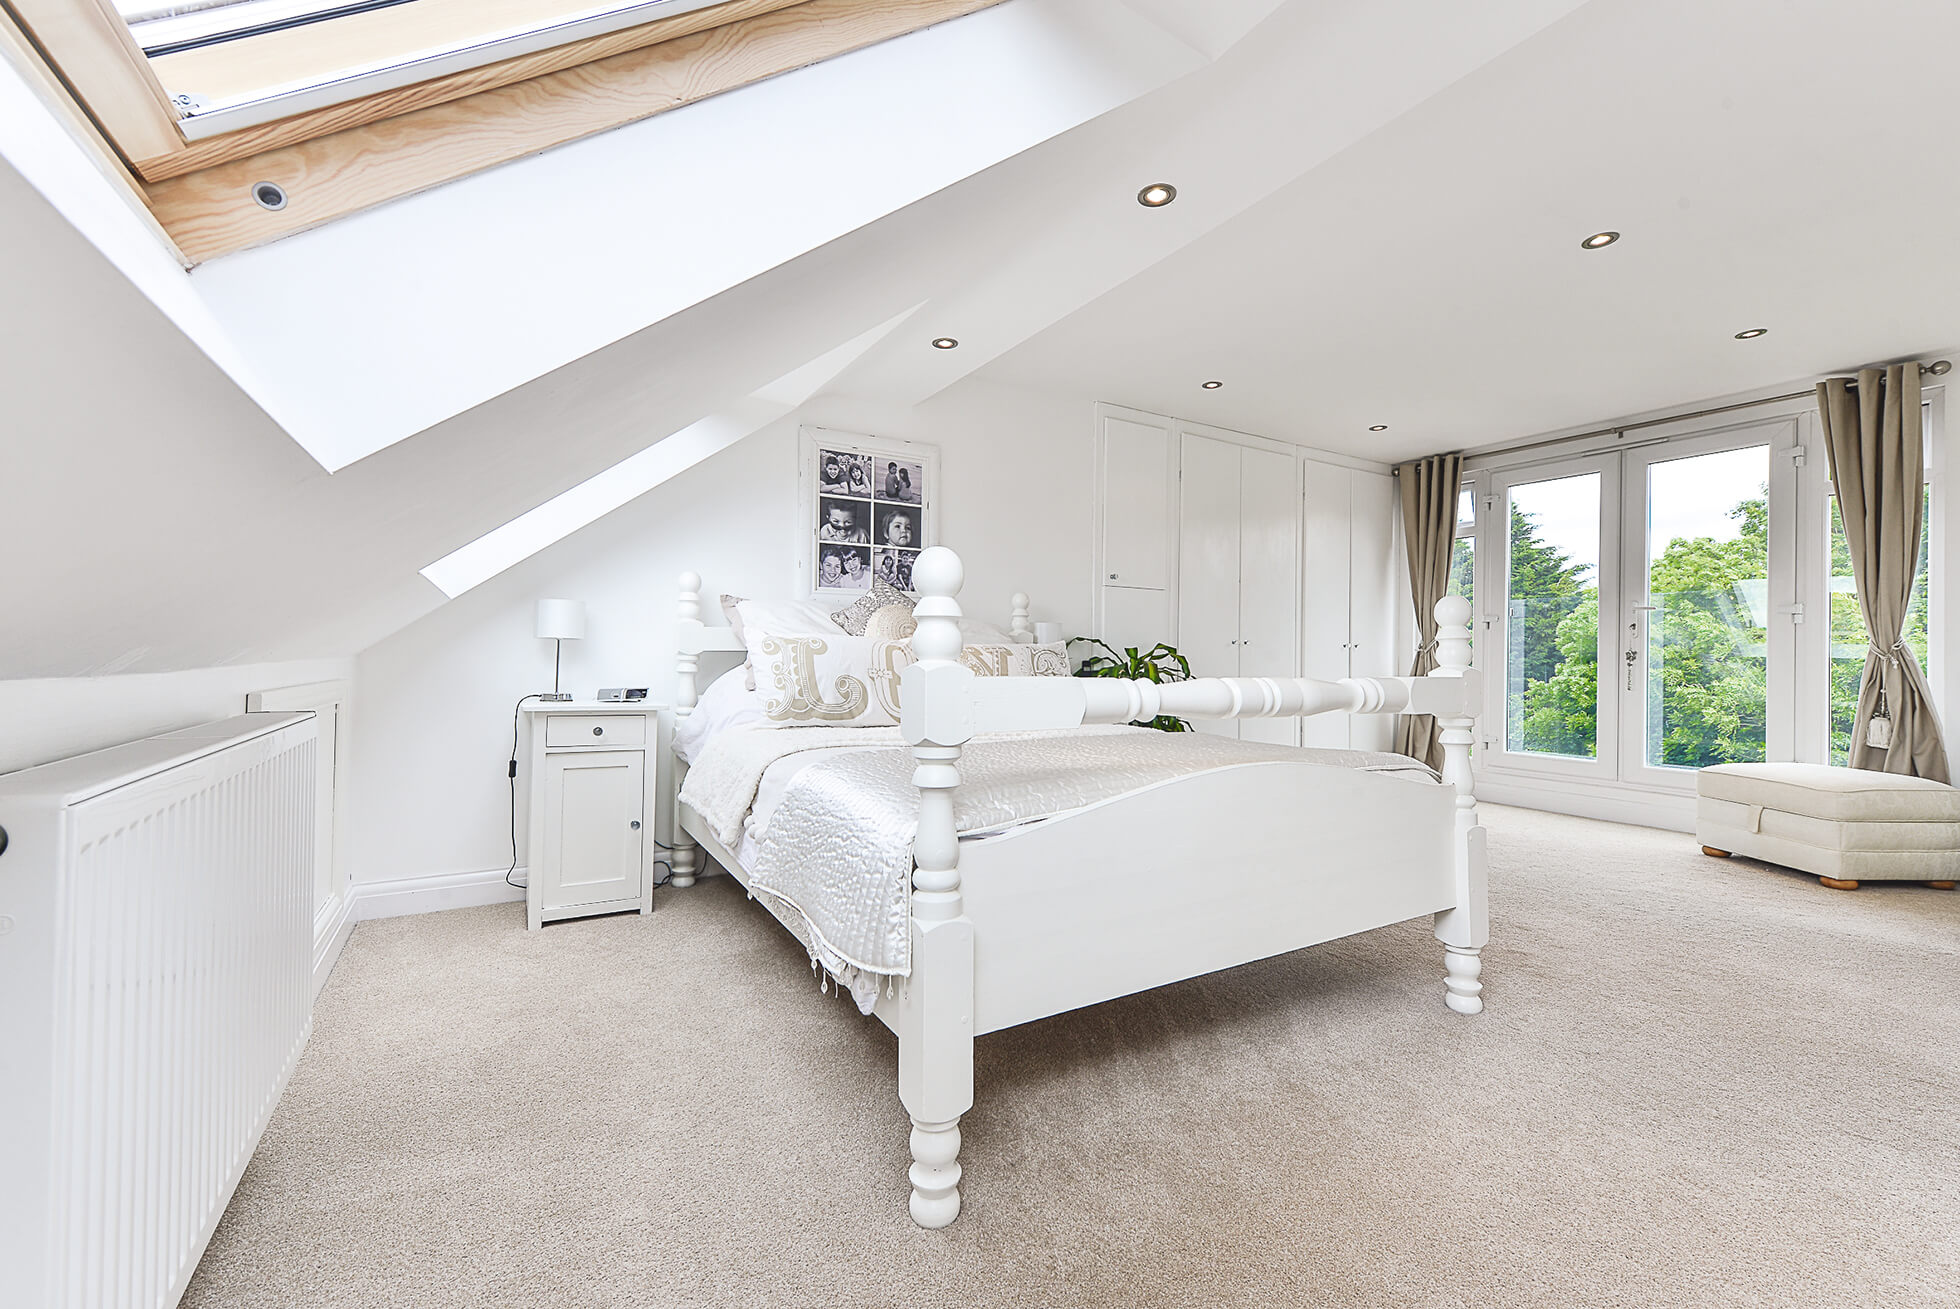 Do you have a question about converting your Loft in Old Knebworth? Here are the most popular questions asked by our clients.